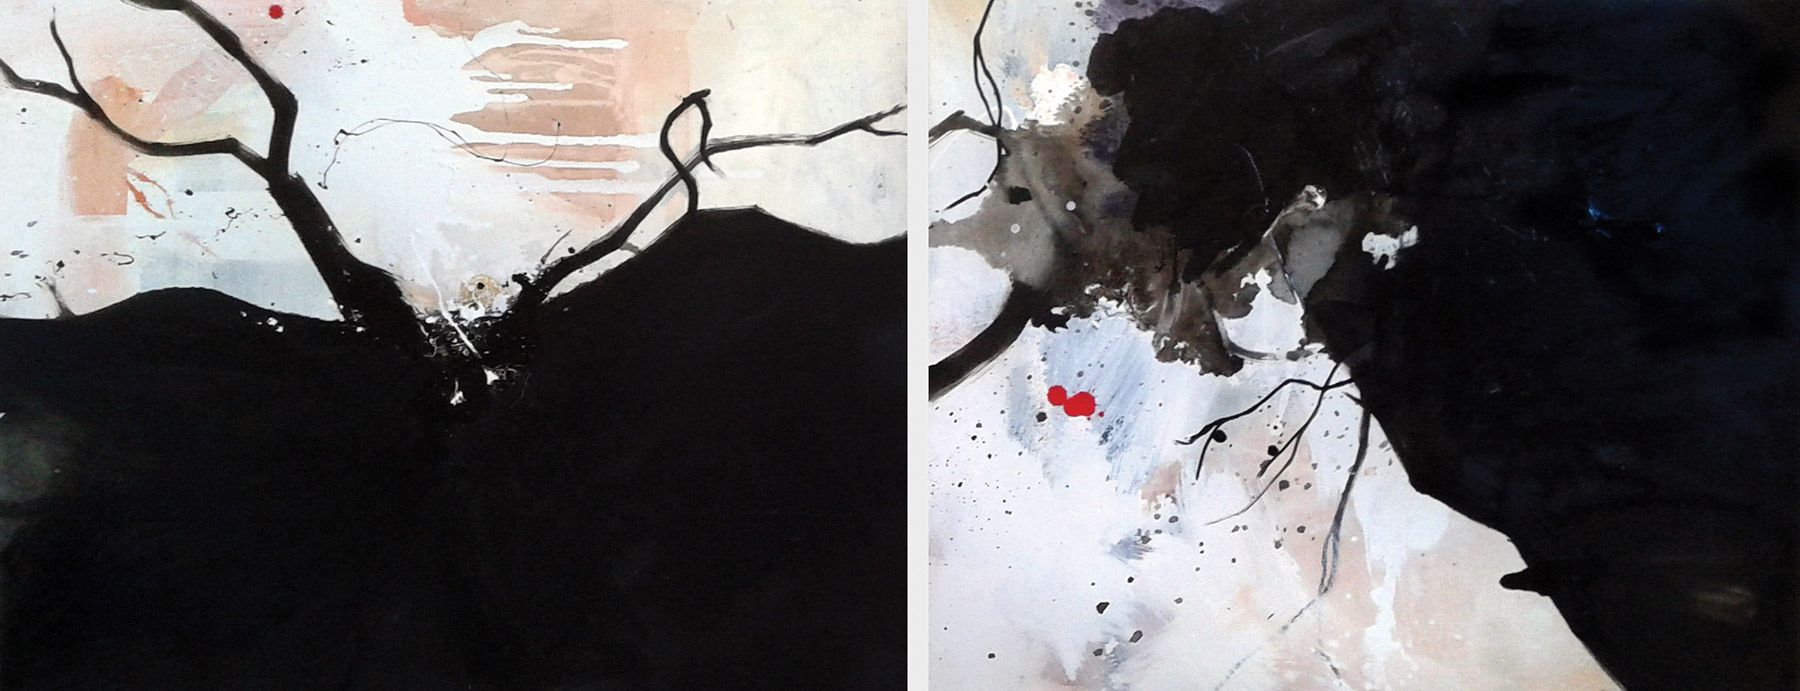 Untitled #45 (diptych) 73x184cm Mixed technique on canvas, 2015